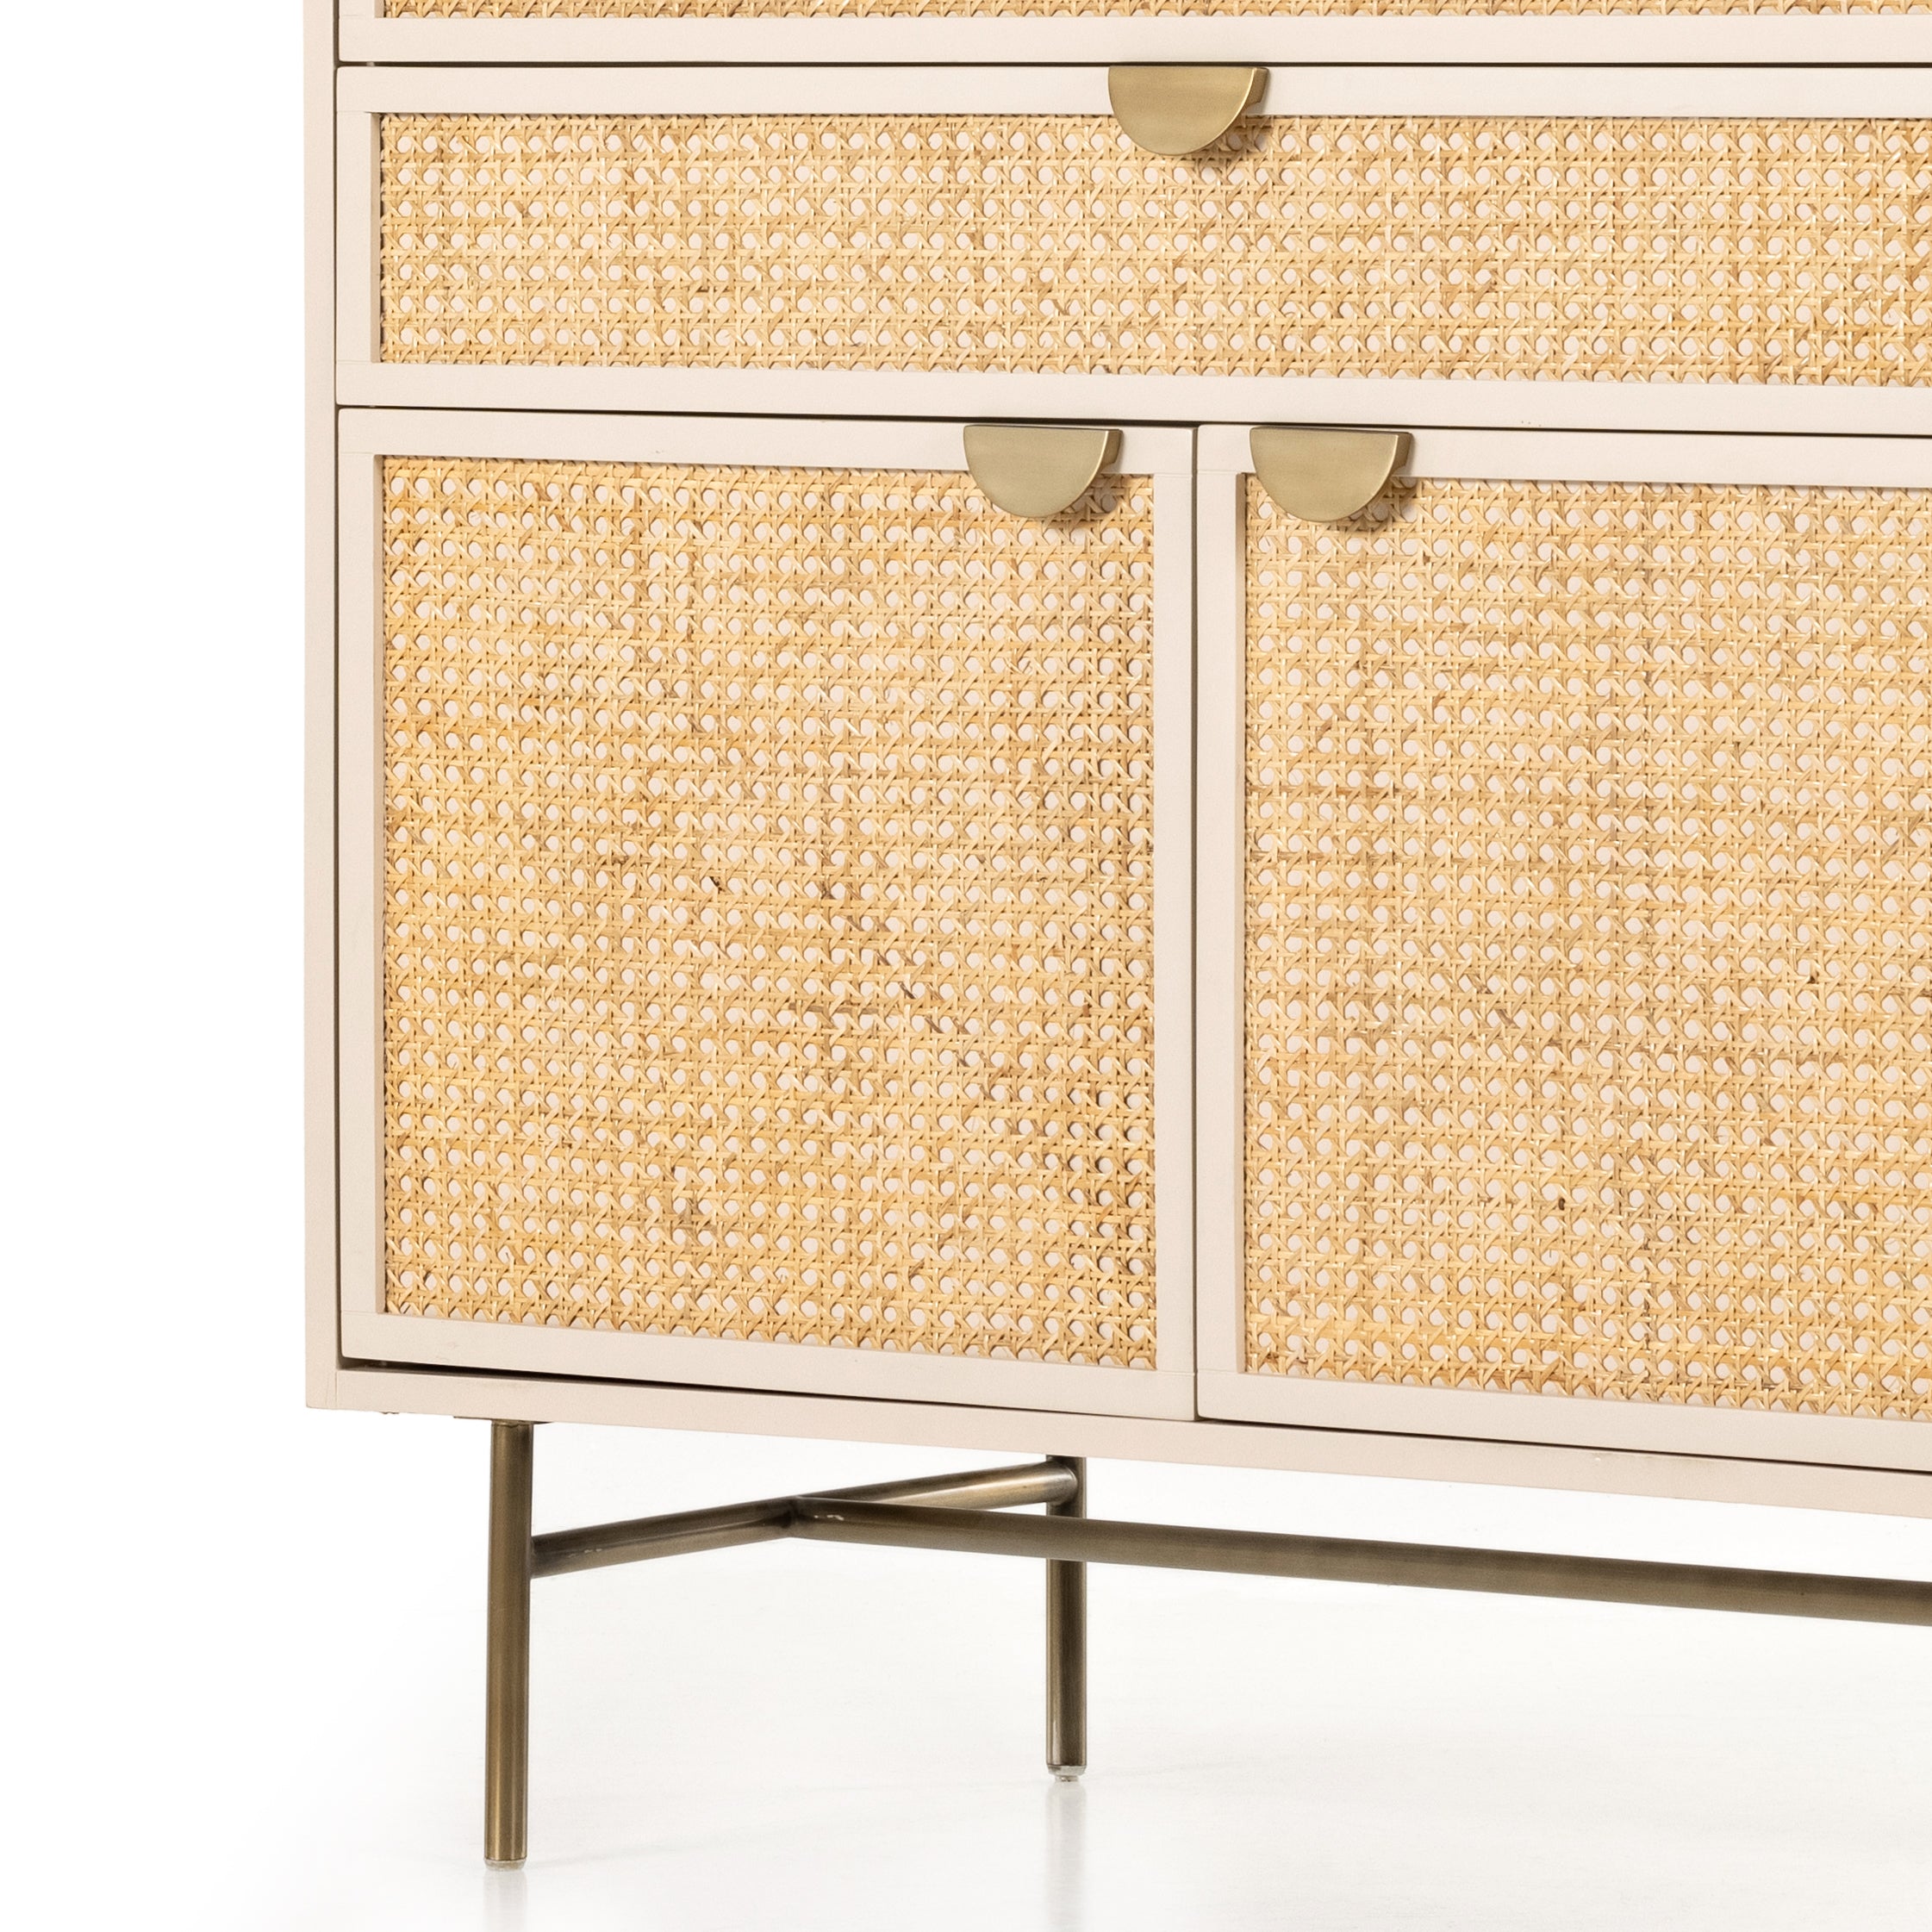 Bring a light look to bedroom styling with this Luella Tall Dresser - Matte Alabaster. A tall, lacquered dresser features woven cane panels and half-moon hardware finished in an aged brass. Four drawers plus cabinetry with interior shelving for generous storage space for any bedroom!   Overall Dimensions: 38.00"w x 19.00"d x 50.00"h